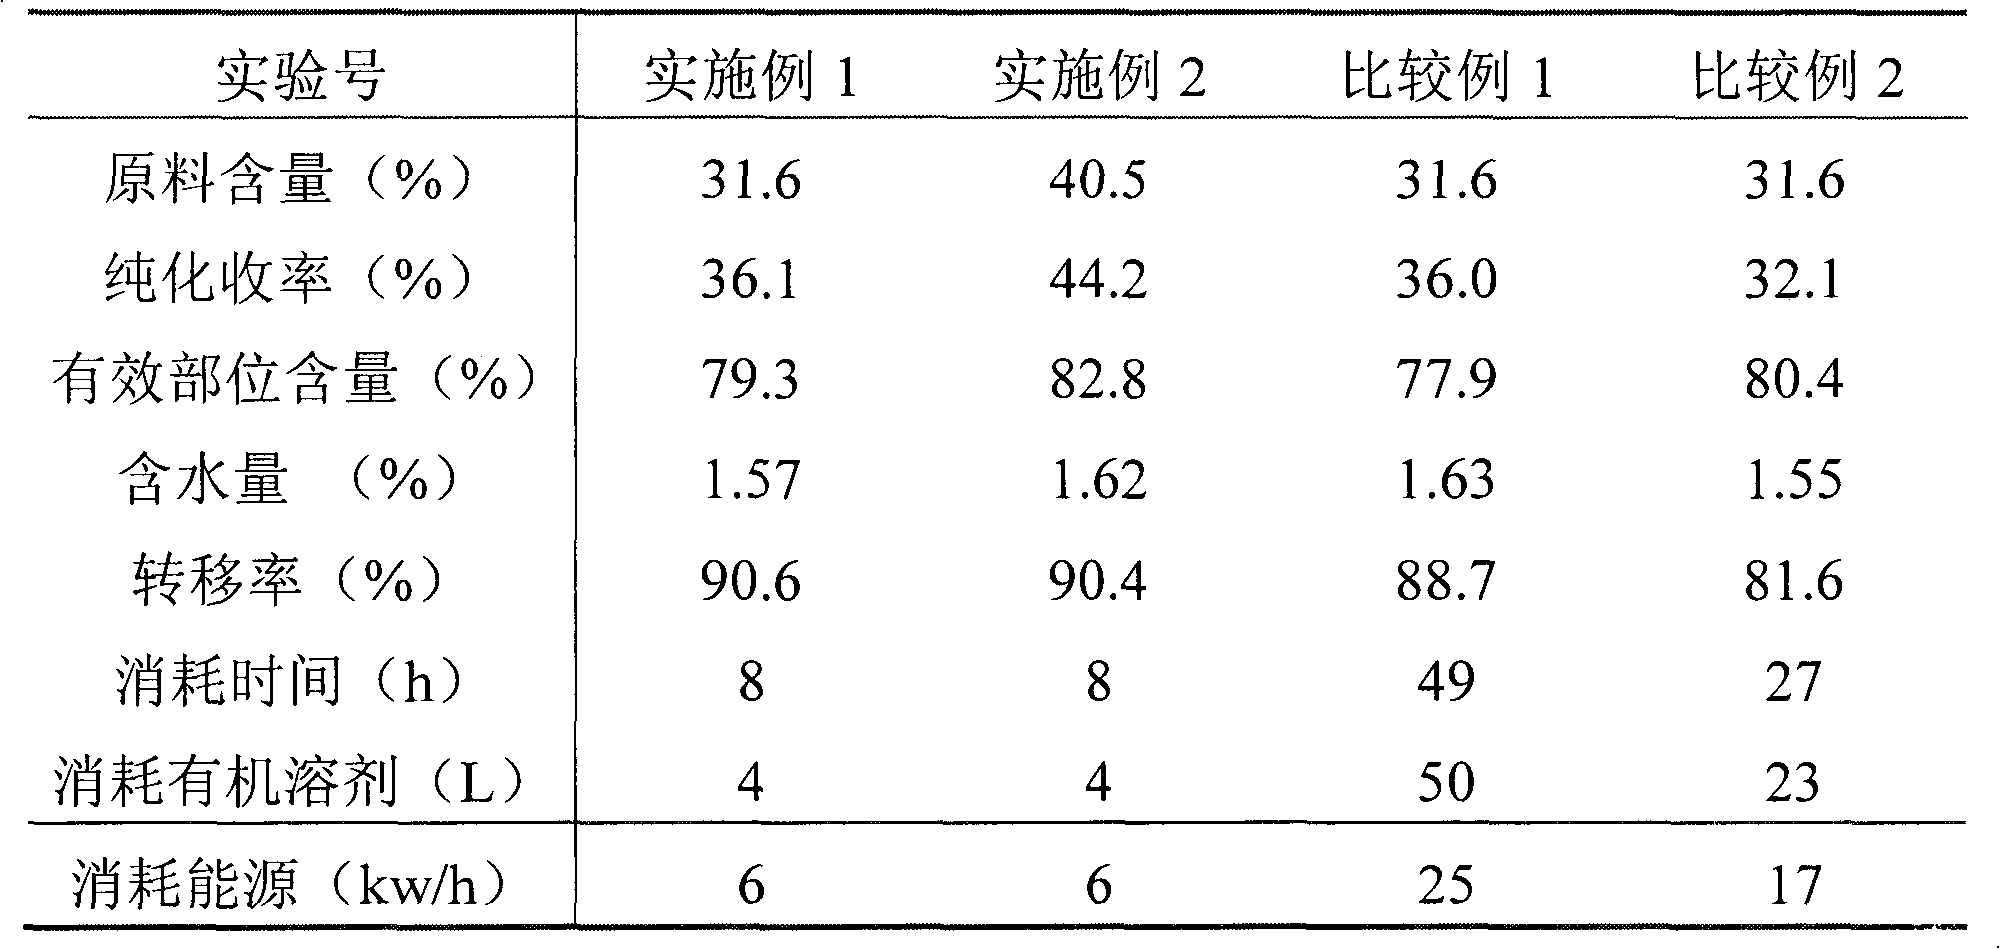 Purification and preparation method for aescin extract